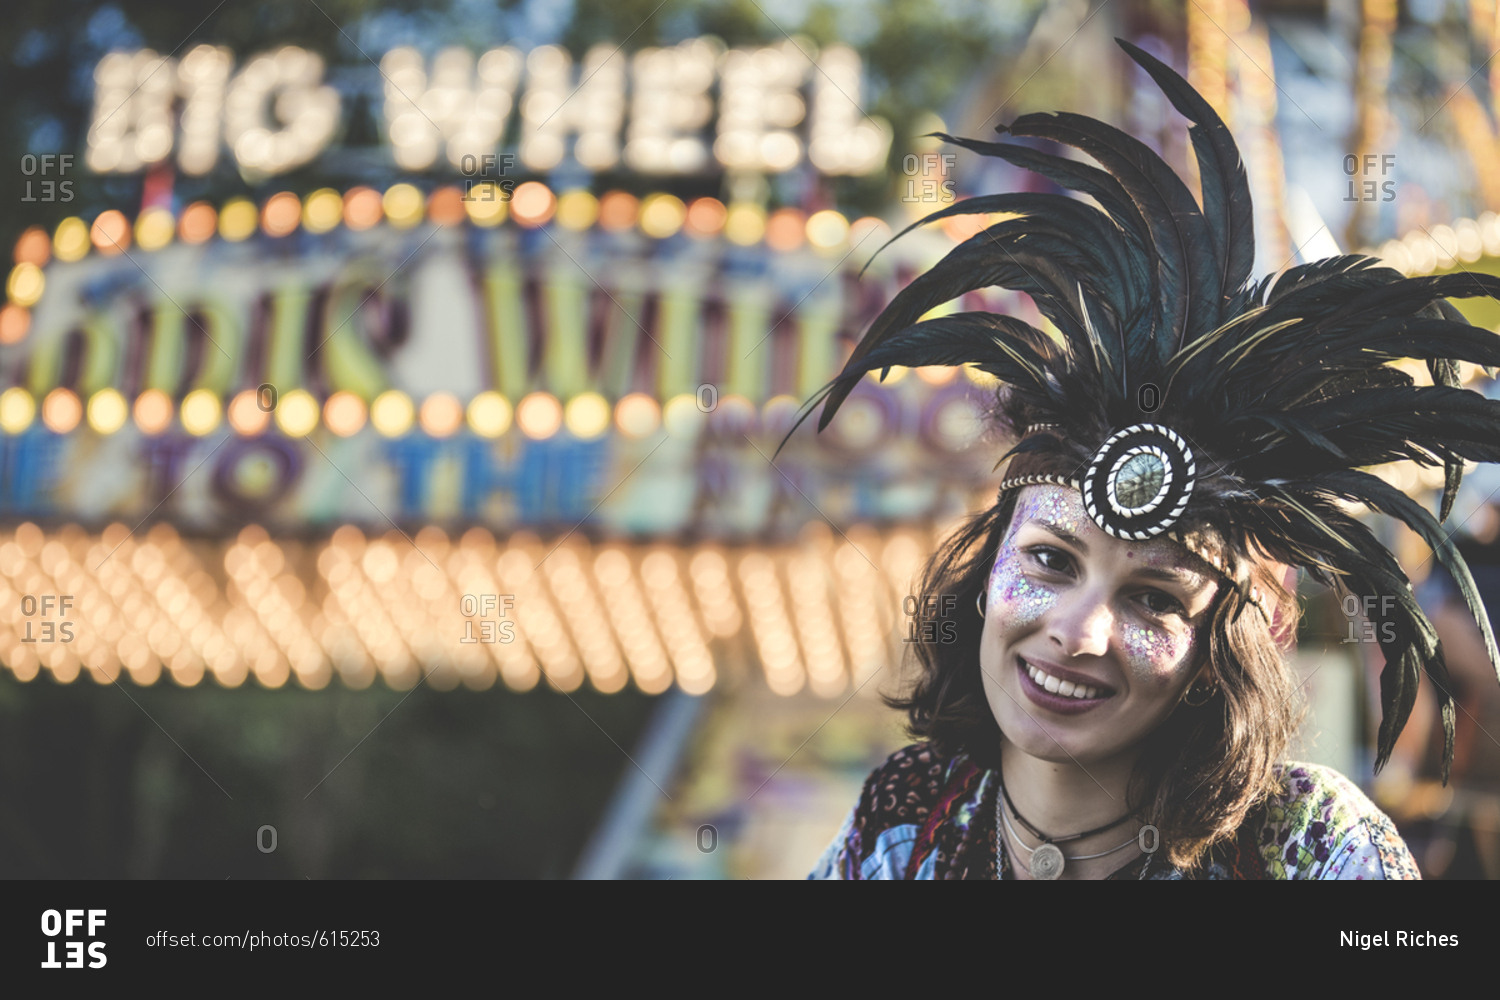 Girl wearing feather headdress in front of a carnival ride